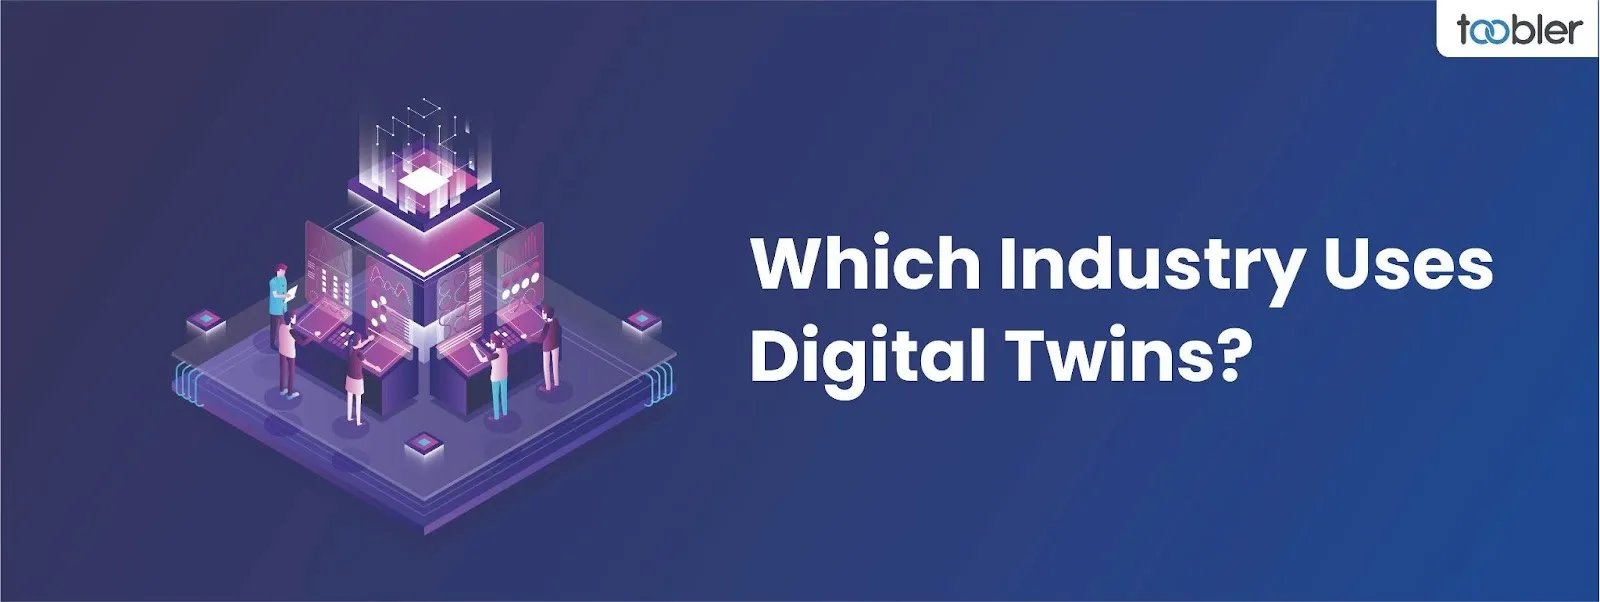 Which Industry Uses Digital Twins?